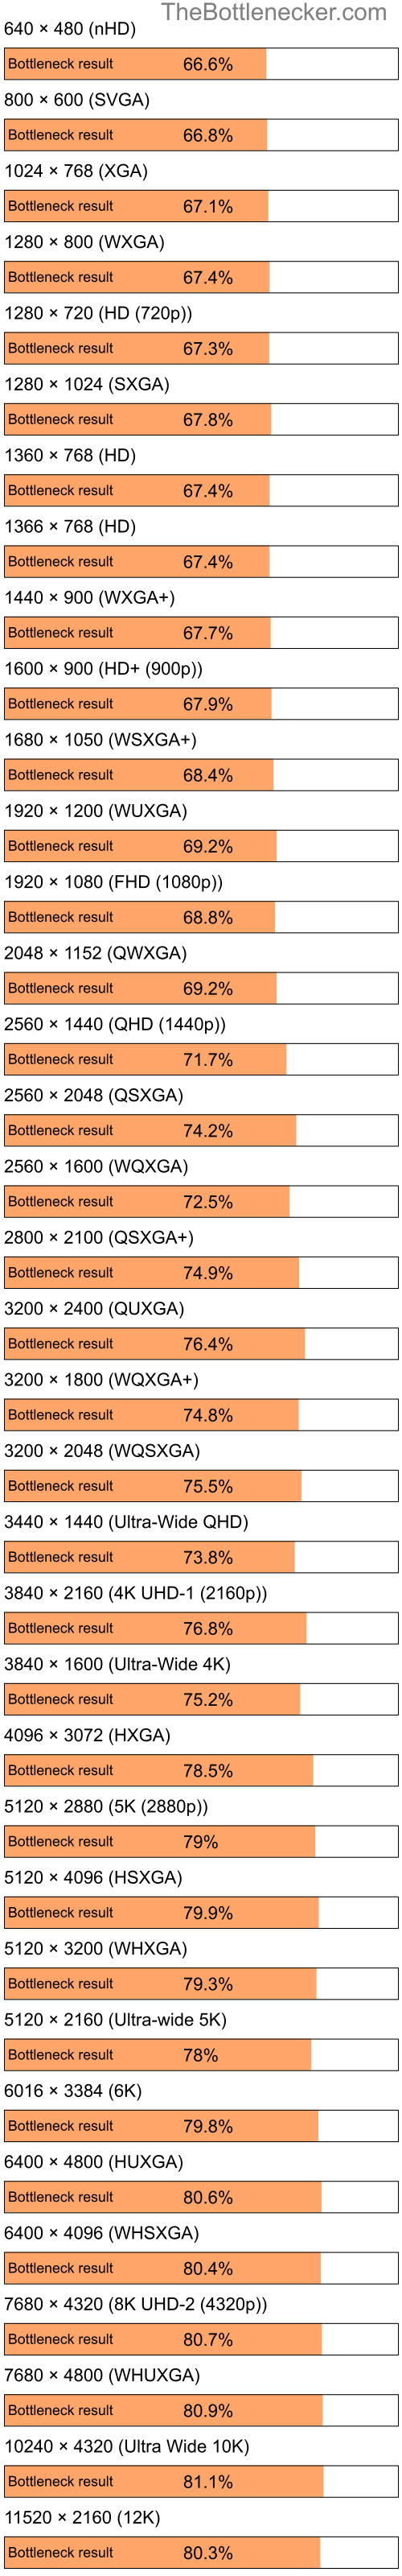 Bottleneck results by resolution for Intel Pentium 4 and NVIDIA GeForce 7300 GS in General Tasks